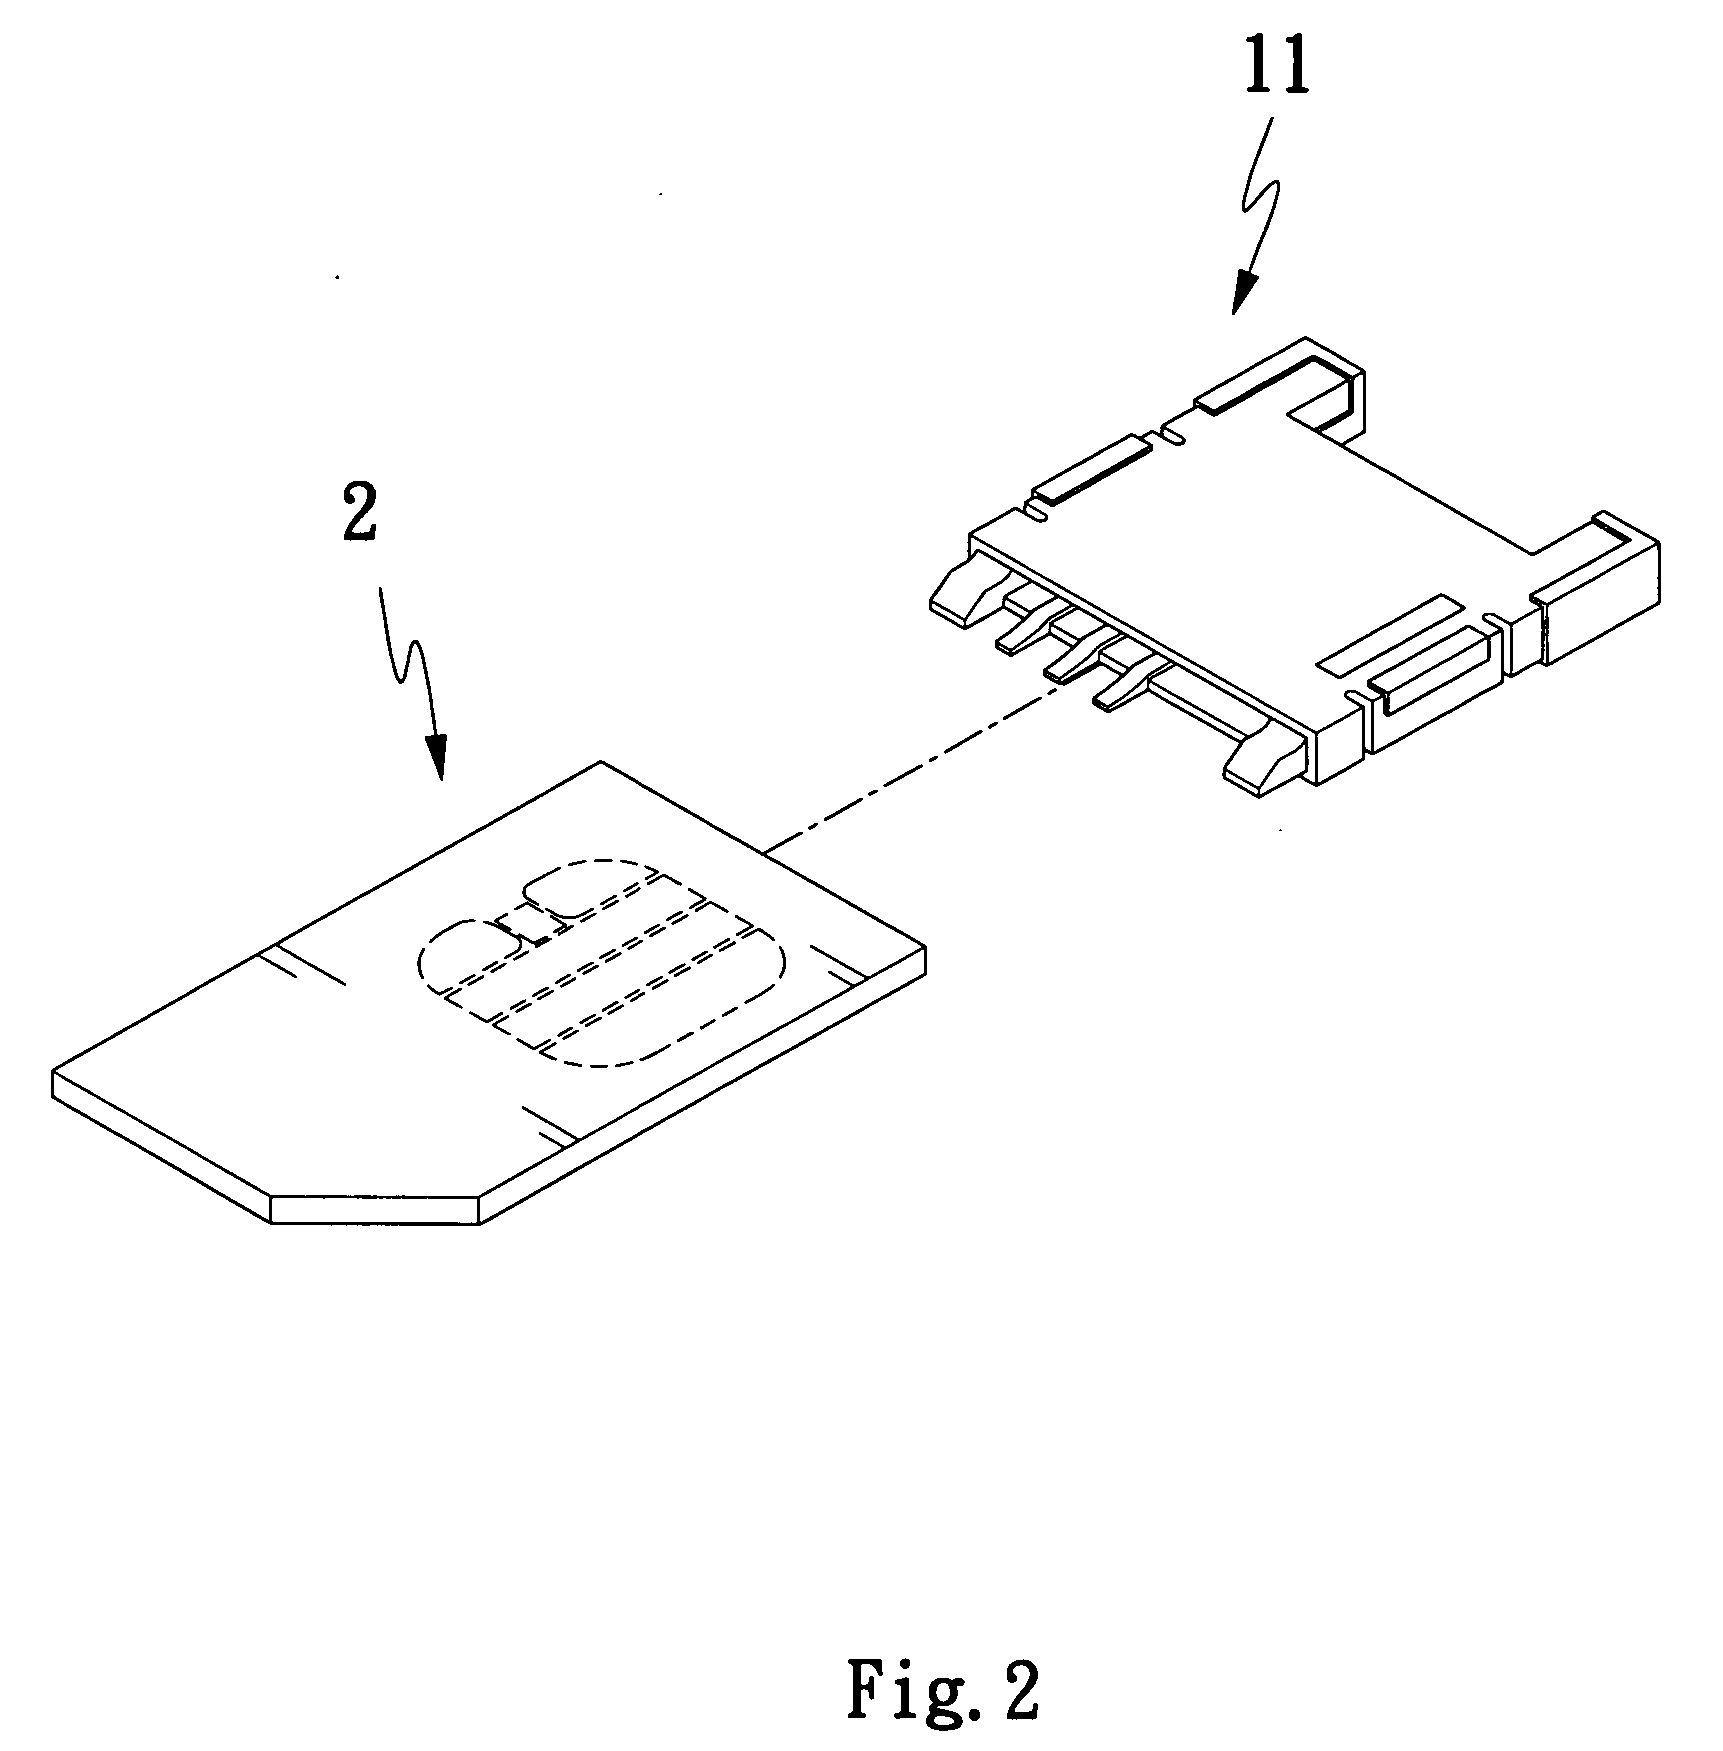 Data read/write device capable of reading SIM card